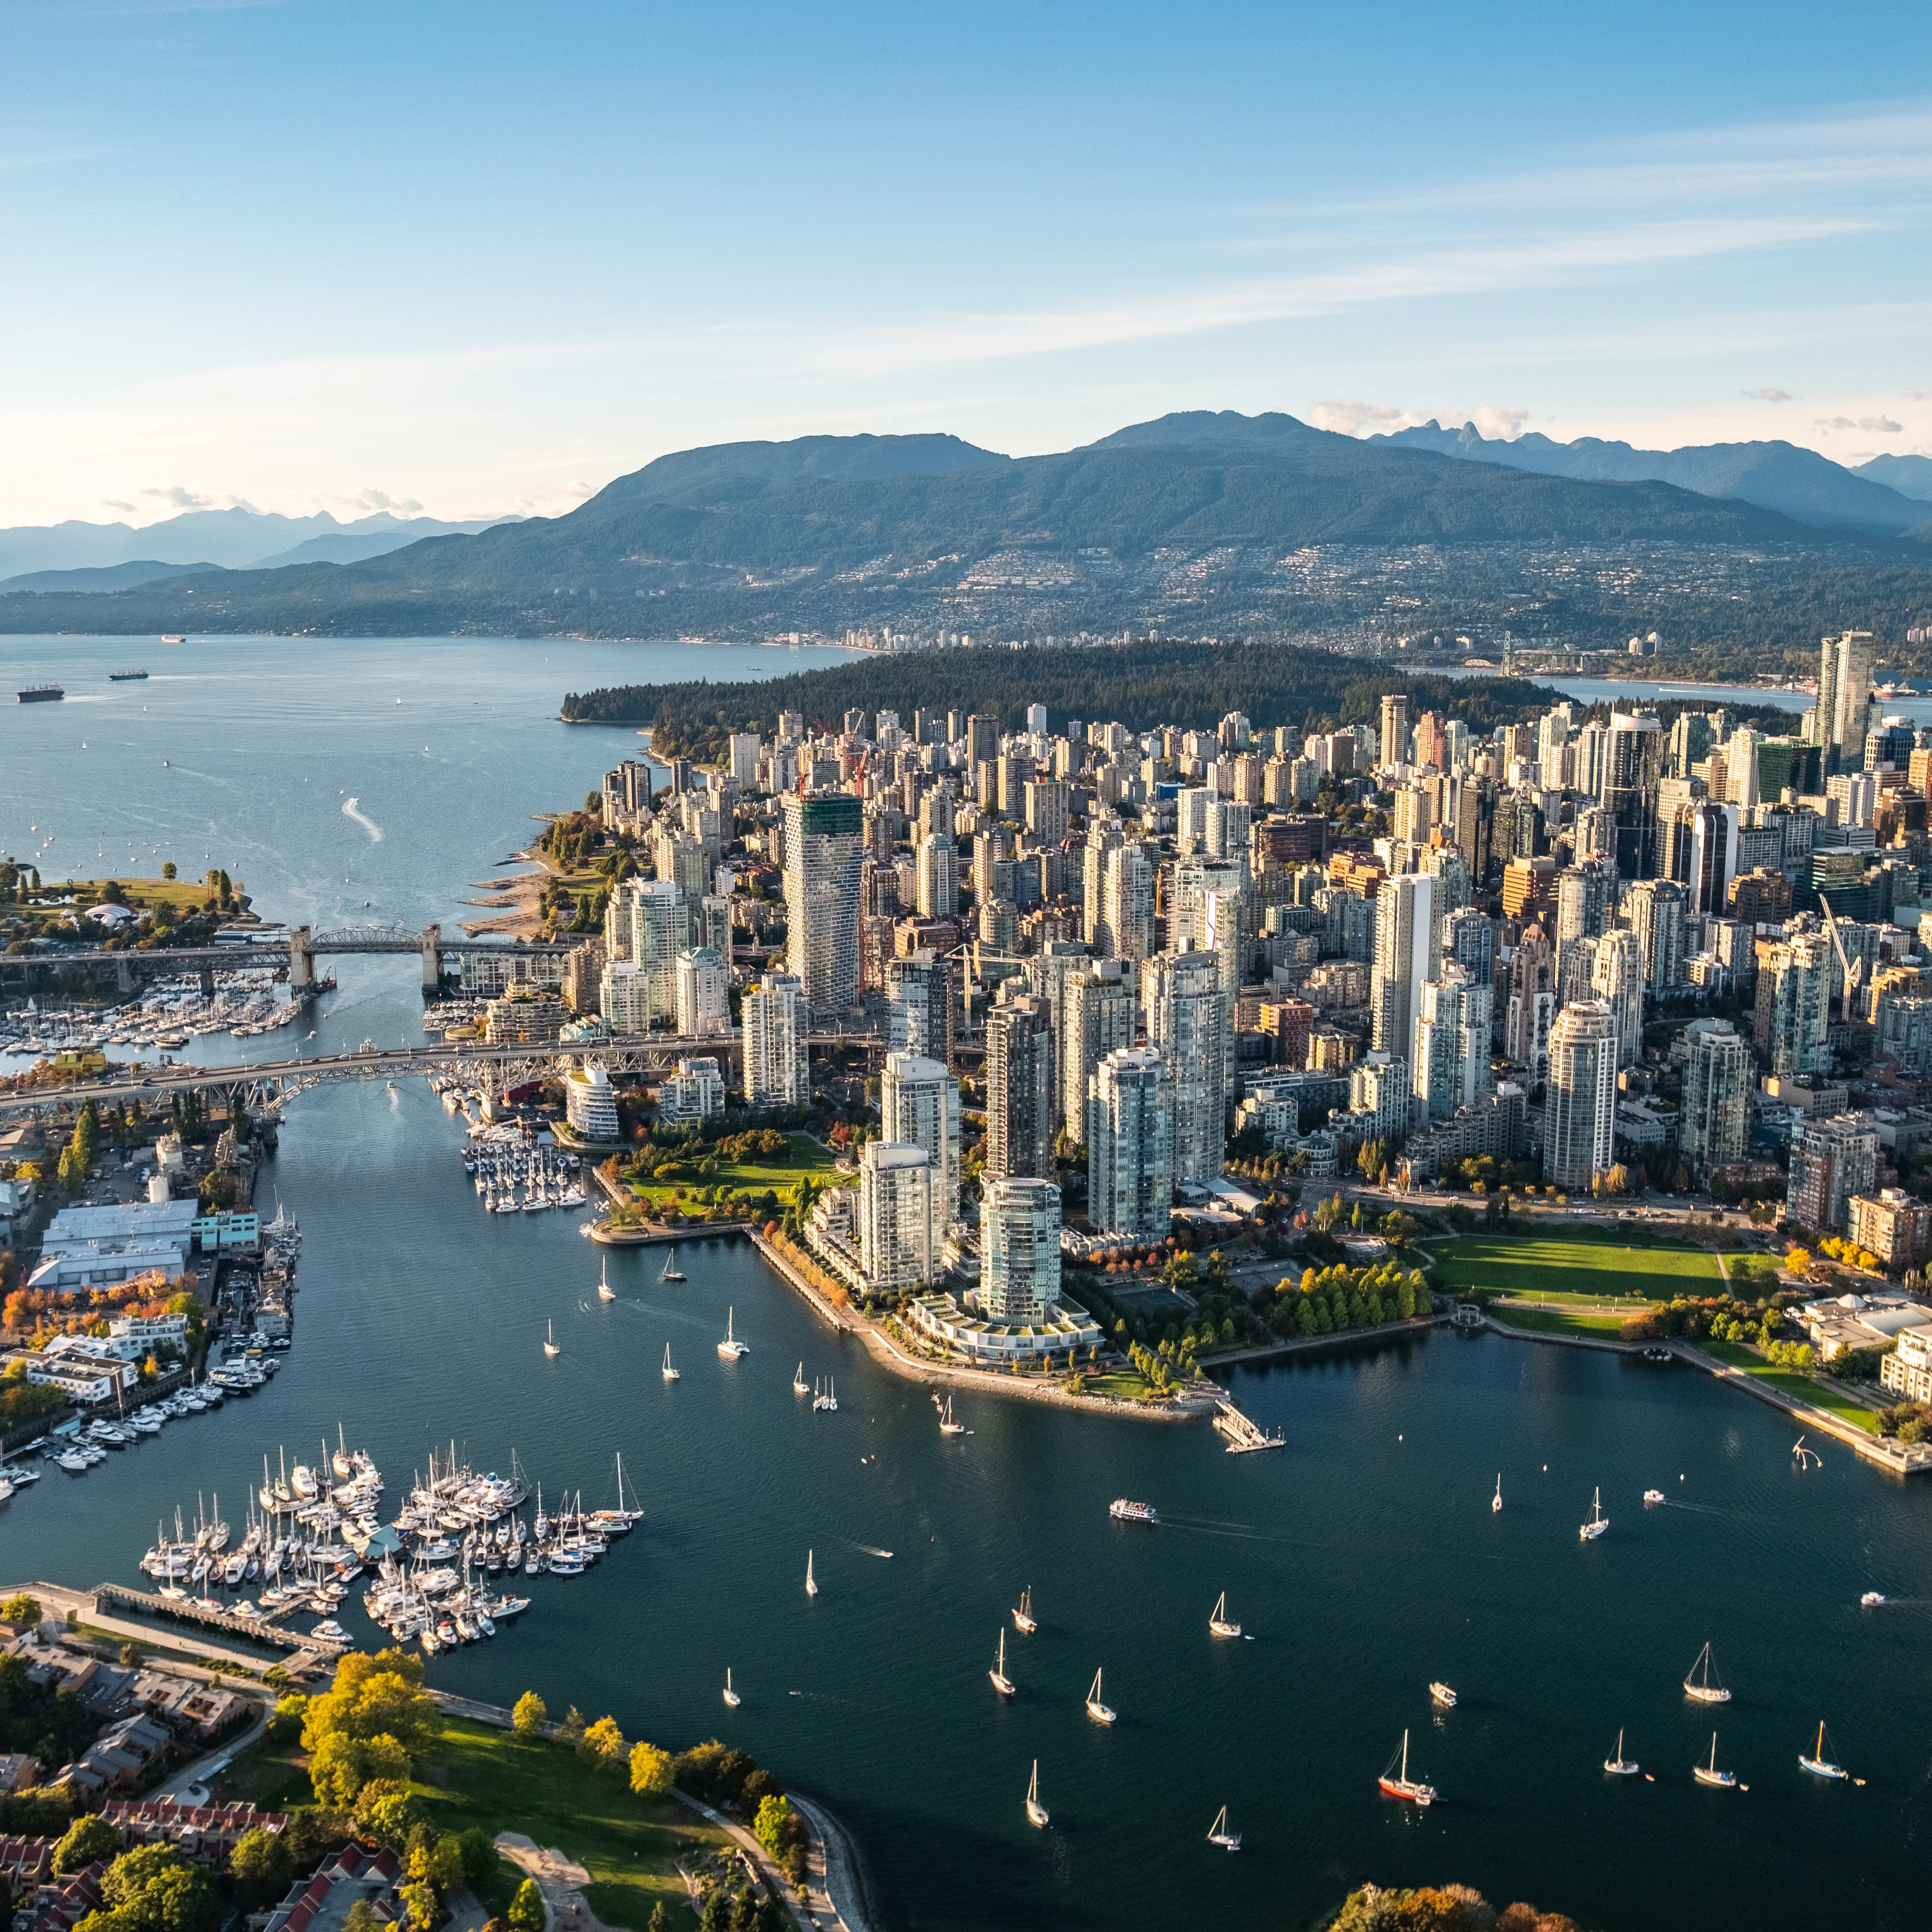 Academic Jobs The scenic beauty of Vancouver with its iconic skyline and educational institutions highlighted